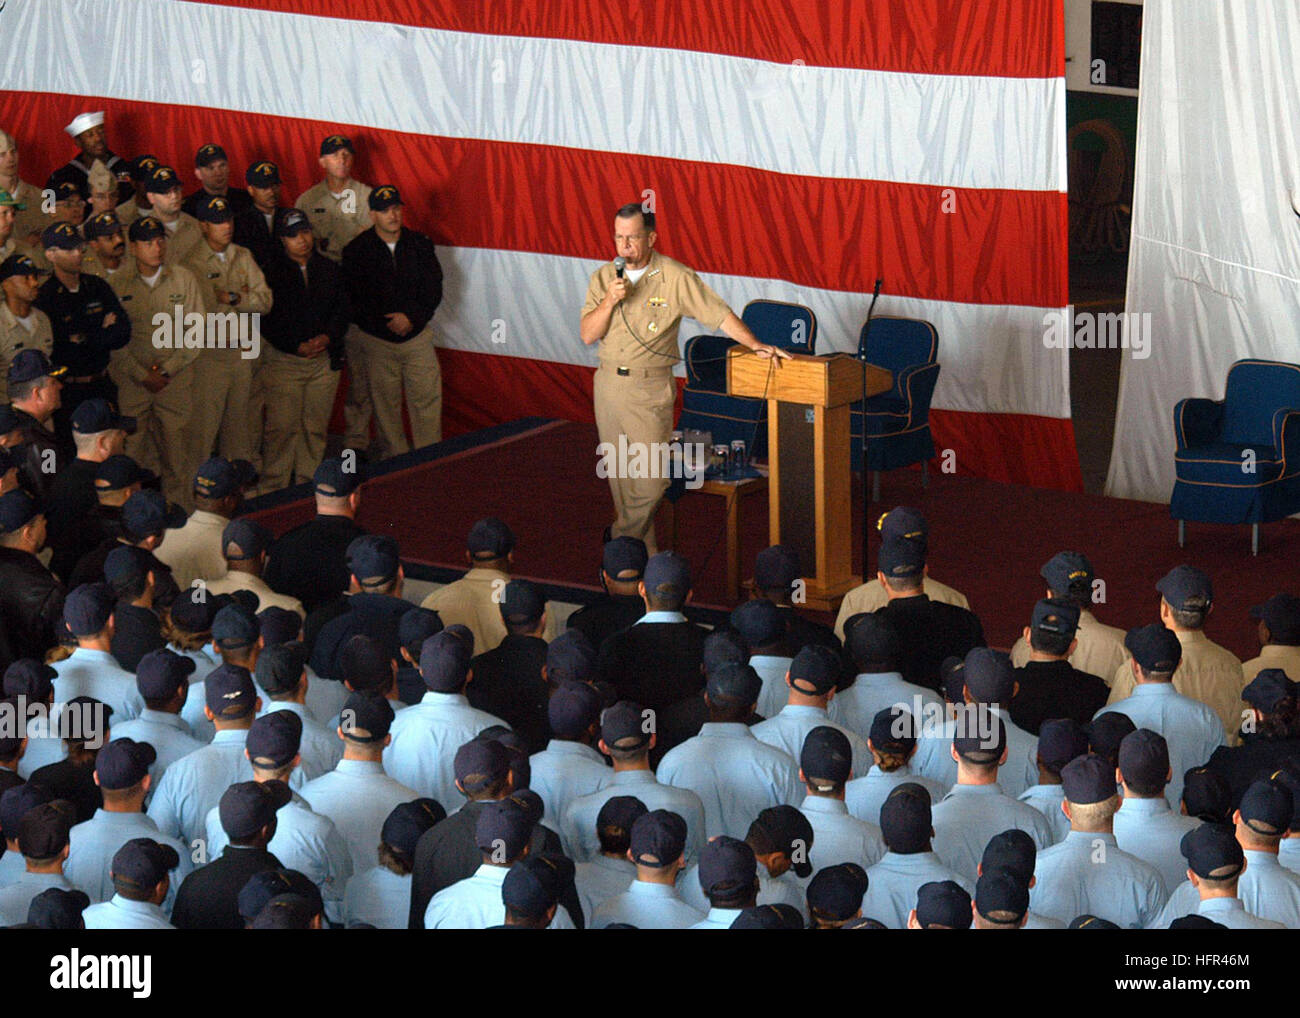 060329-N-8090G-019 Mayport, Fla. (March 29, 2006) - Chief of Naval Operations Adm. Mike Mullen conducts an allÐhands call aboard USS John F. Kennedy (CV 67). Mullen visited Kennedy to keep the crew abreast of the ongoing debate over the storied carrierÕs future. U.S. Navy photo by Photographer's Mate Airman Nicholas Garratt (RELEASED) US Navy 060329-N-8090G-019 Chief of Naval Operations Adm. Mike Mullen conducts an all%%5Endash,hands call aboard USS John F. Kennedy (CV 67) Stock Photo